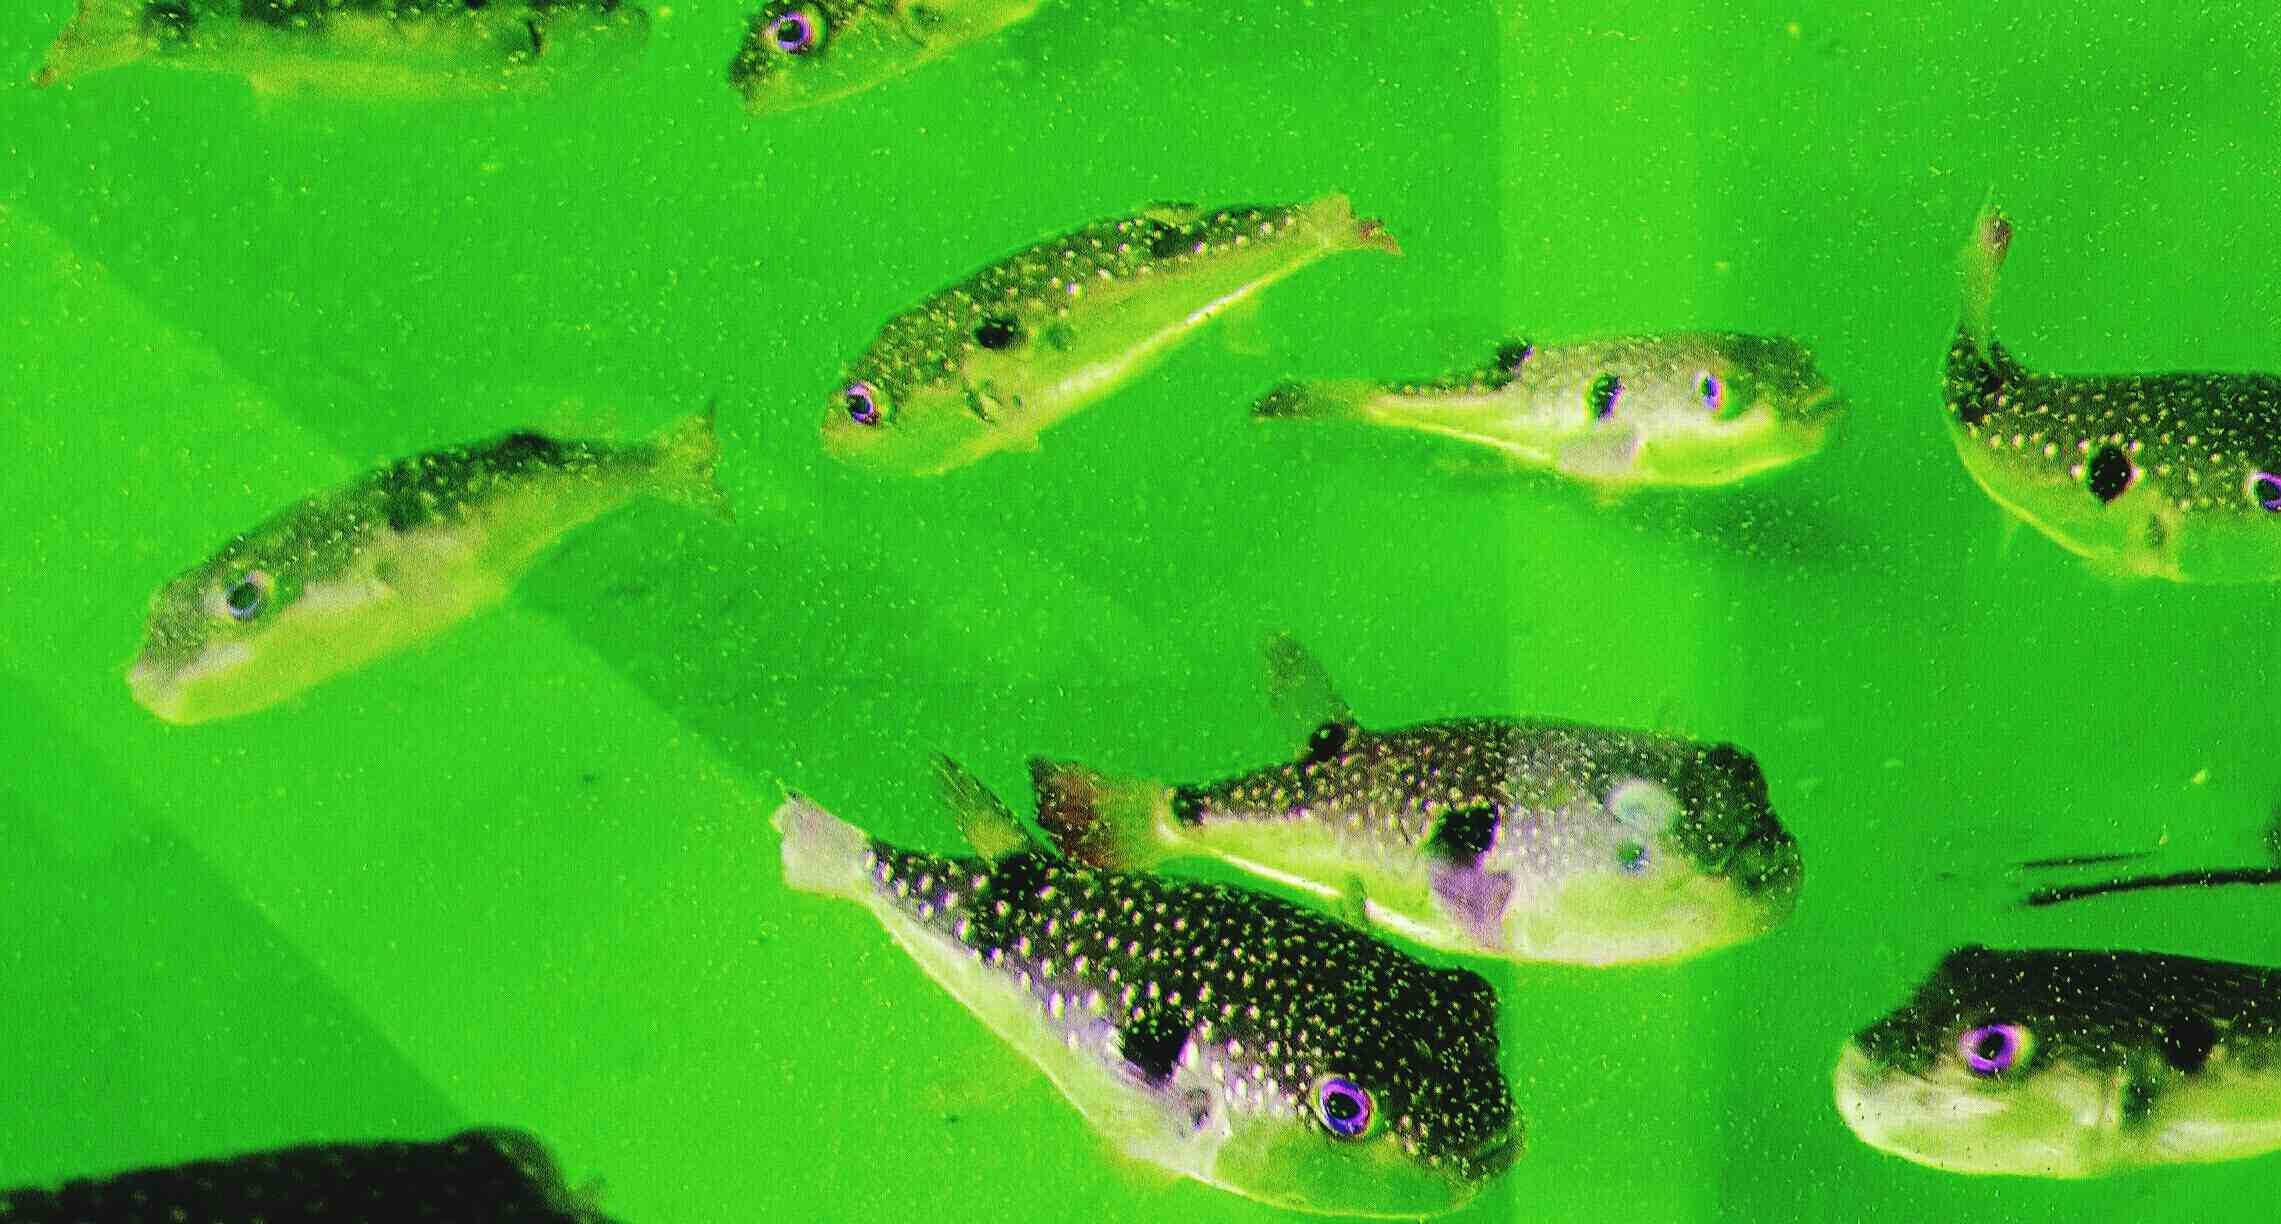 Green water in an aquarium with fish